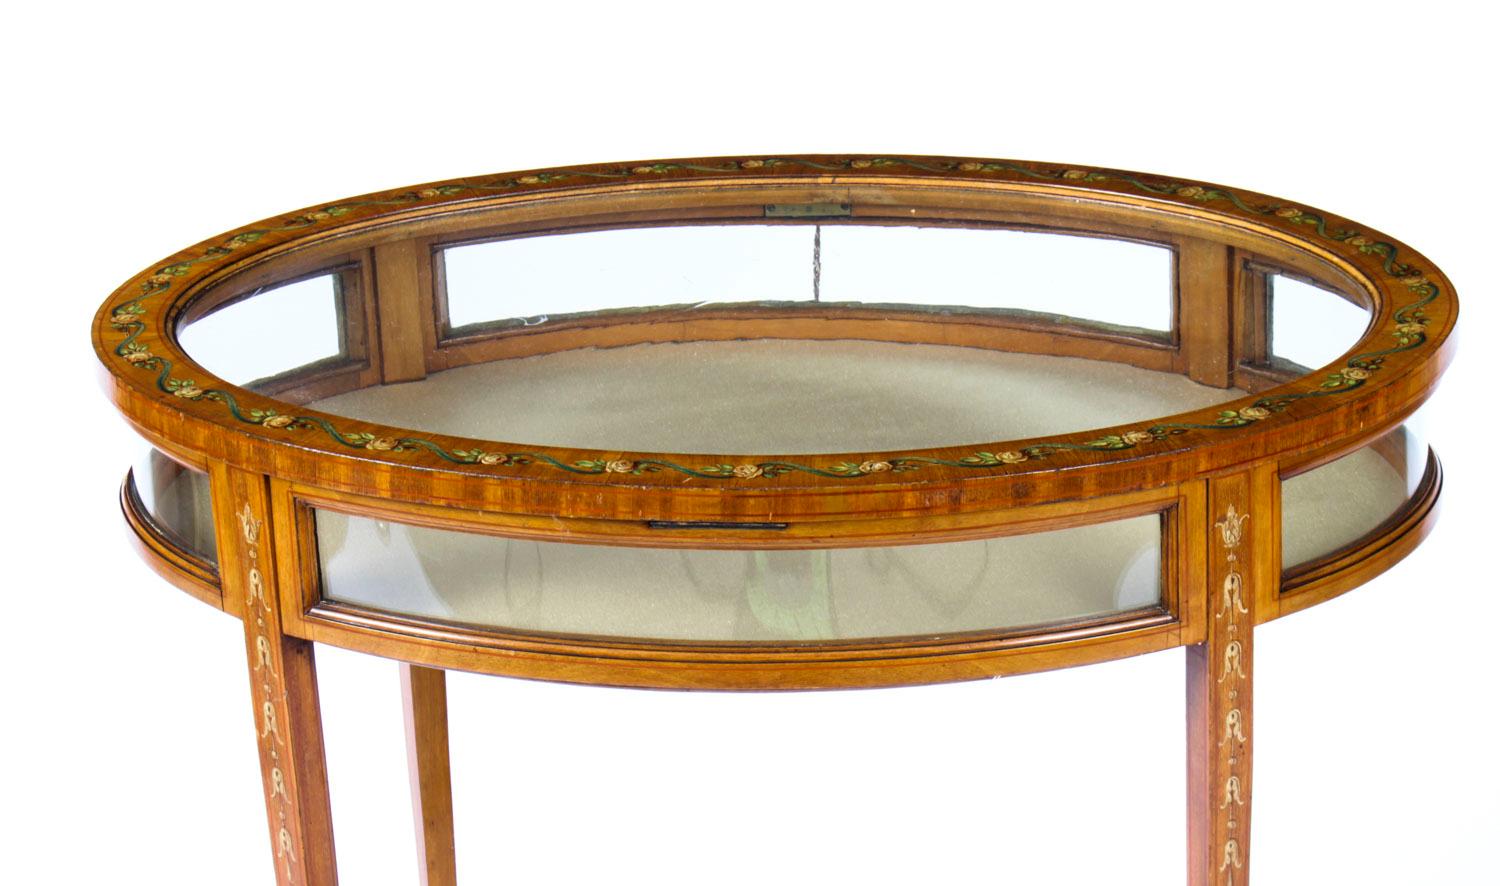 Early 20th Century Antique Edwardian Satinwood Bijouterie Display Table 1900s